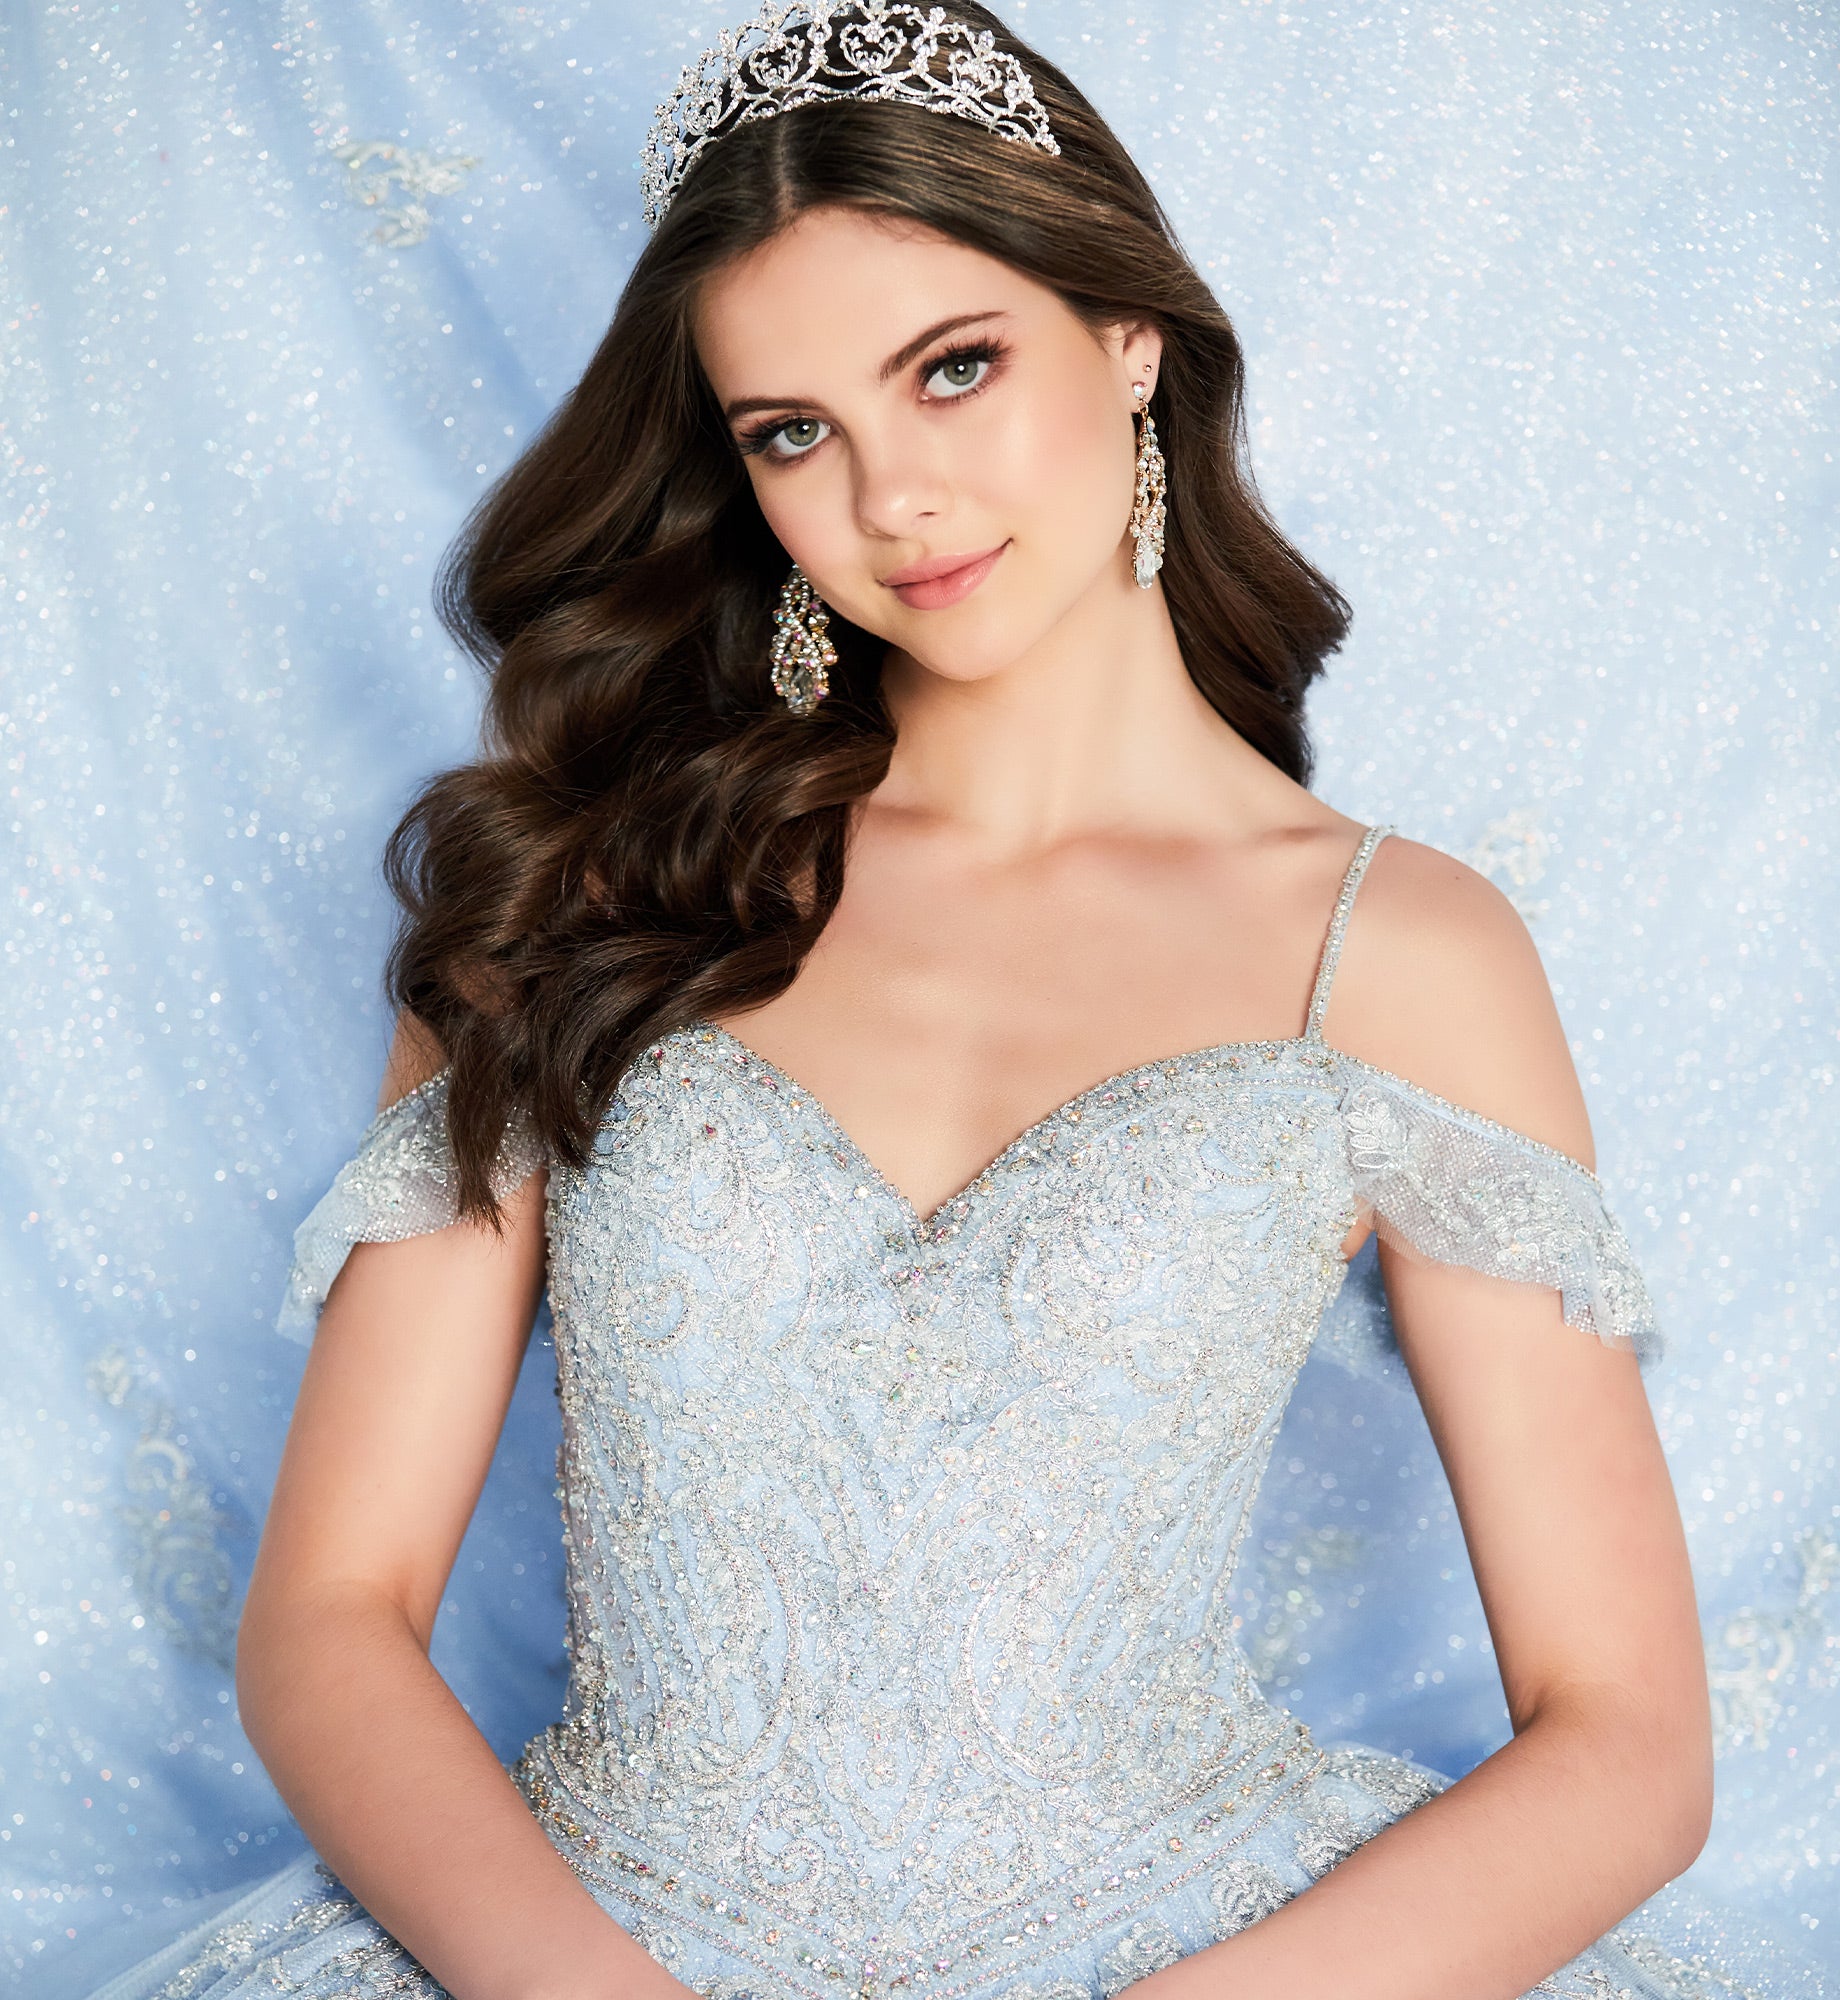 Princess-worthy glitter tulle quinceanera dress